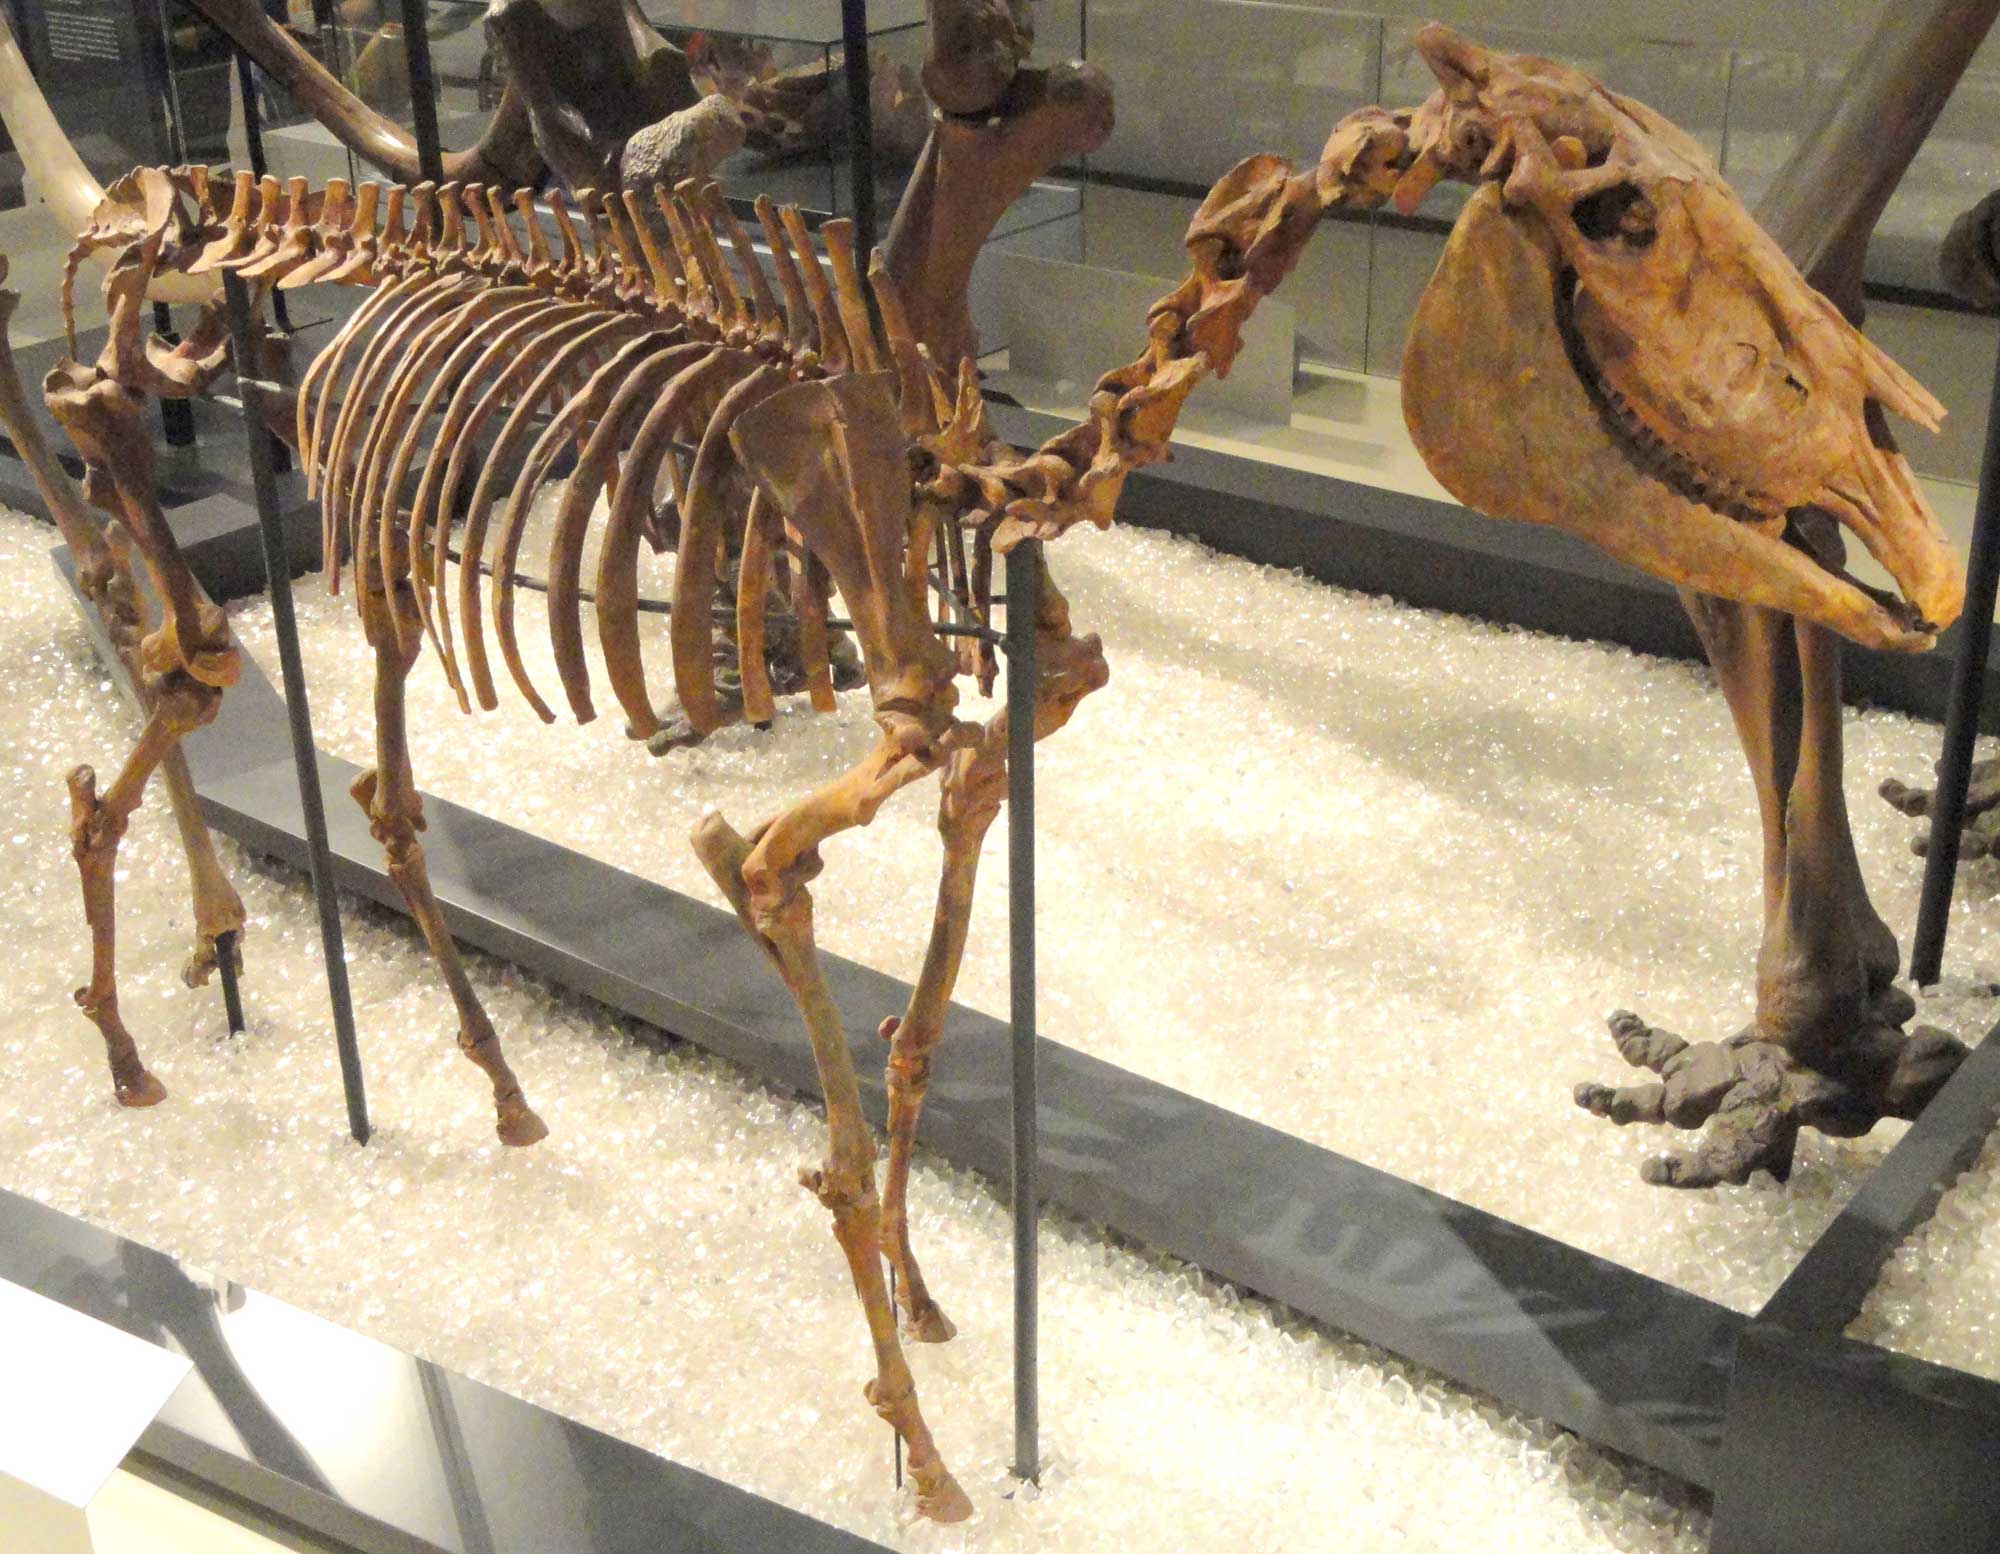 Photograph of a mounted skeleton of a Hagerman horse from the Pliocene of Idaho on display in a museum. The photo shows a complete horse skeleton mounted standing on four long legs, each ending in a hoof with one toe. The tail is short, the neck elongated, and the skull robust with a large lower jaw.